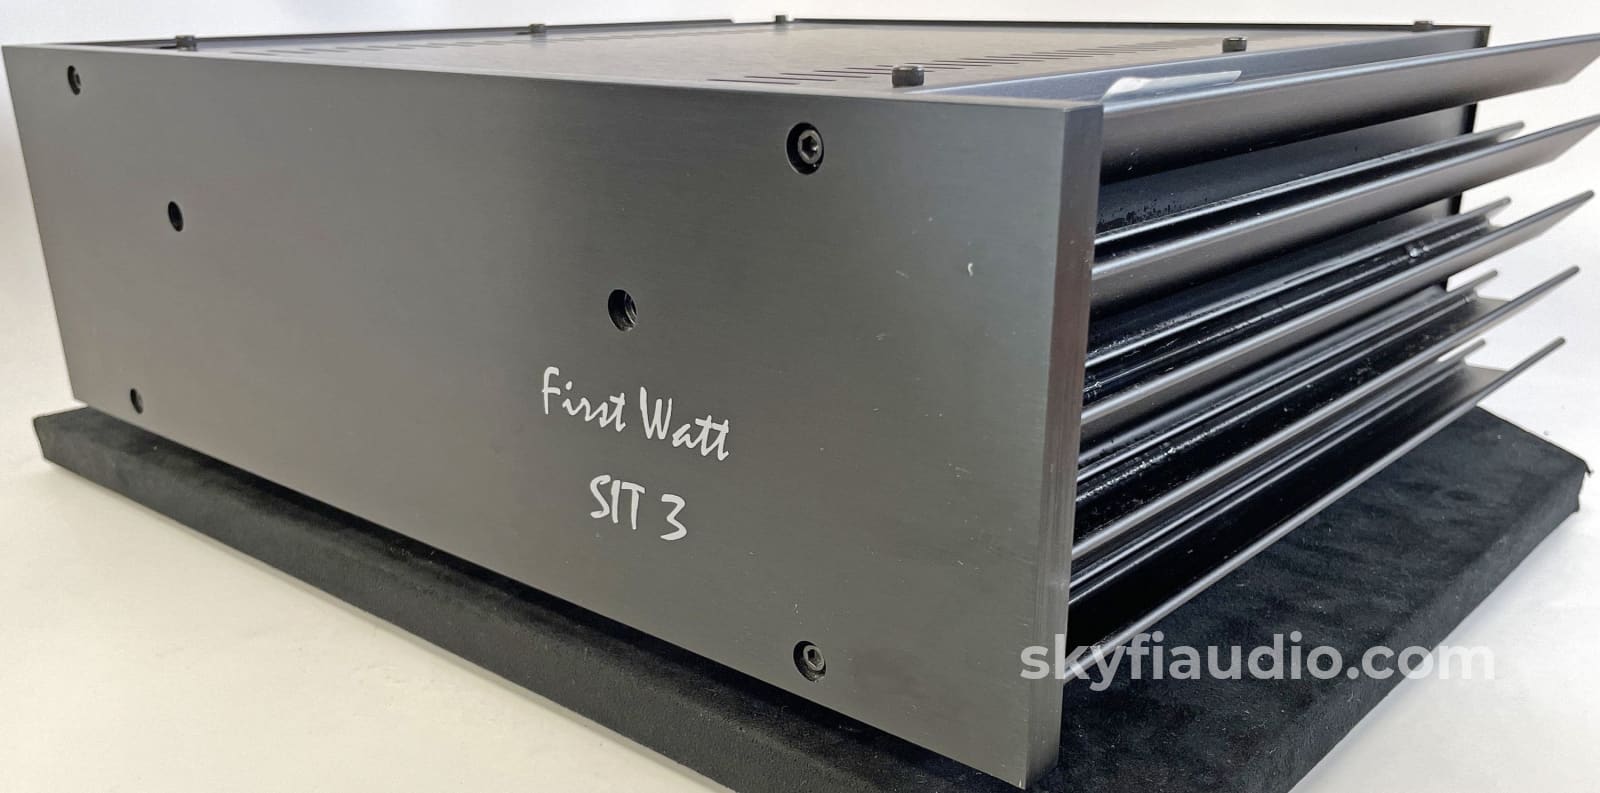 First Watt Sit-3 Class A Amplifier - Like New In Box And Highly Reviewed 1 Of 250 Made!